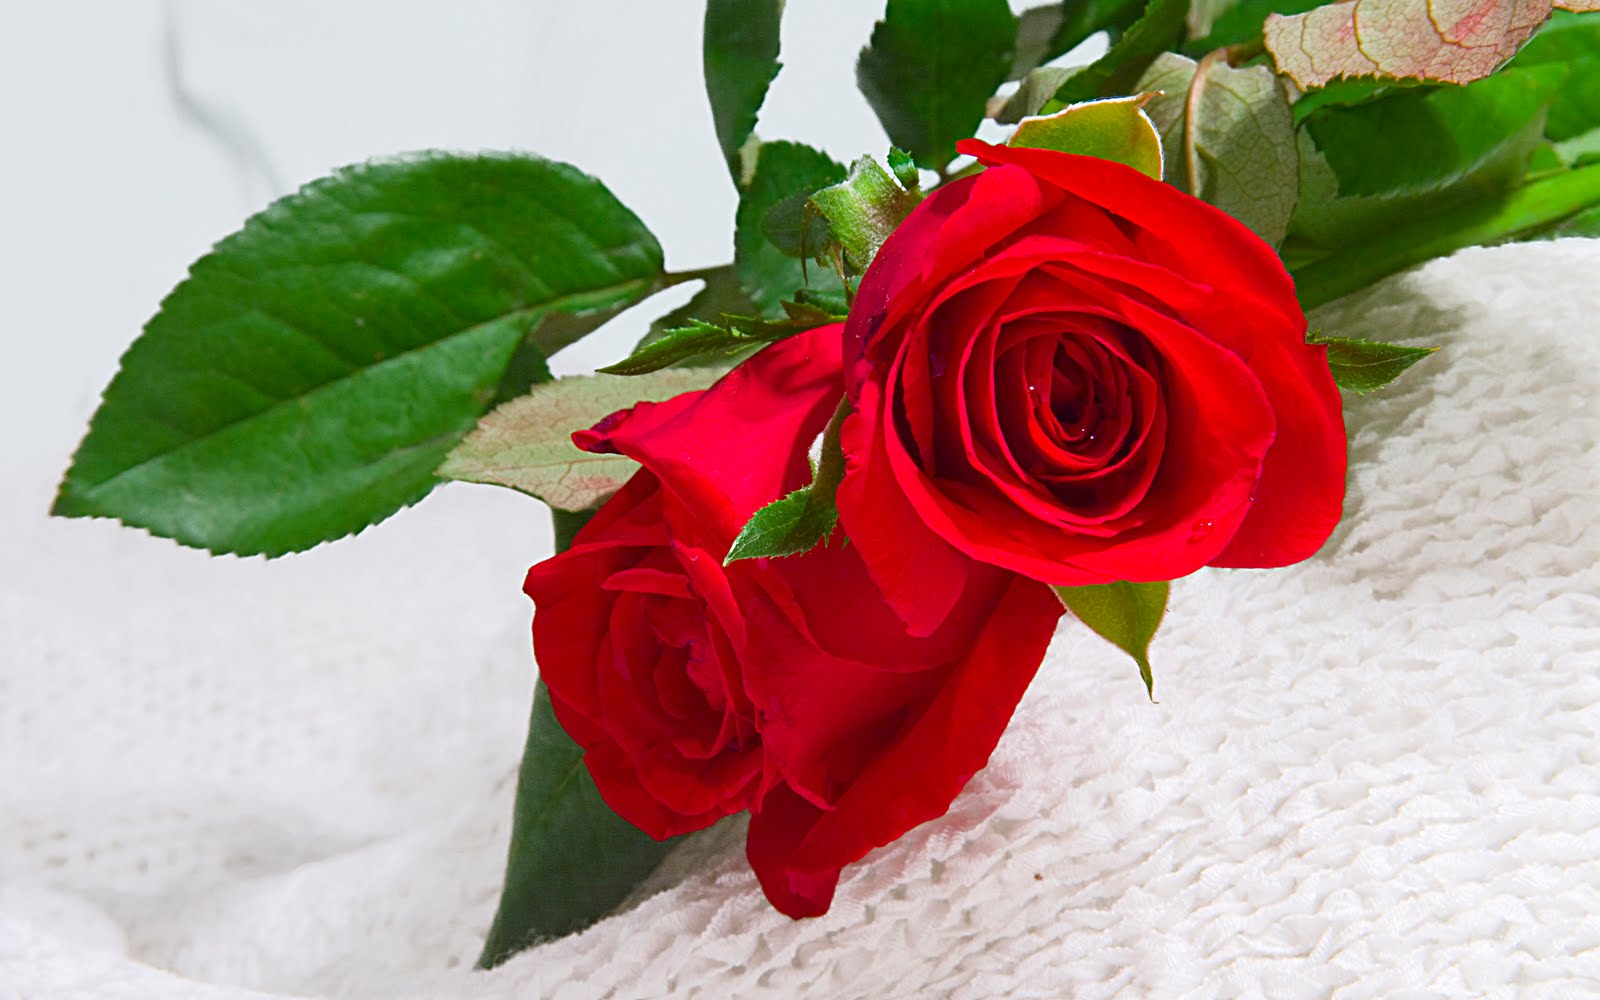 Flowers Photo And Wallpaper Red Rose Flower